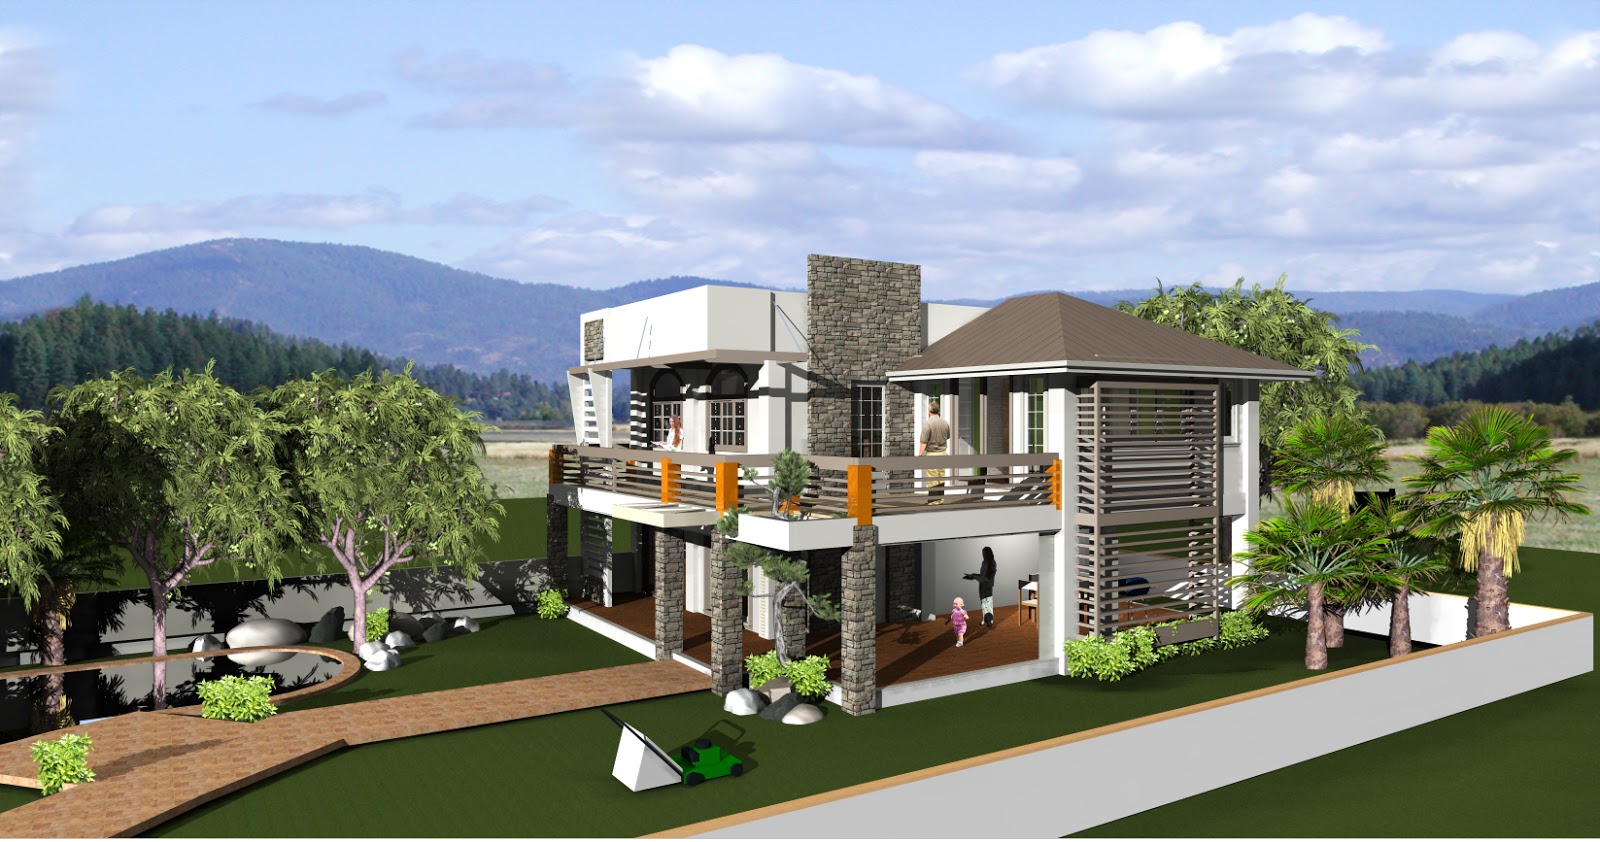 http://3.bp.blogspot.com/-oeIhfBdEBxI/ULbcocWYIDI/AAAAAAAADHU/h0HkinD7qtA/s1600/model%20houses%20in%20the%20philippines%20home%20construction%20philippines%20real%20estate%20developer%20philippines%20philippines%20house%20design%20iloilo%20house%20design%20in%20philippines%20house%20designs%20philippines%20philippines%20real%20estate%20developer%20house%20contractor%20philippines.bmp